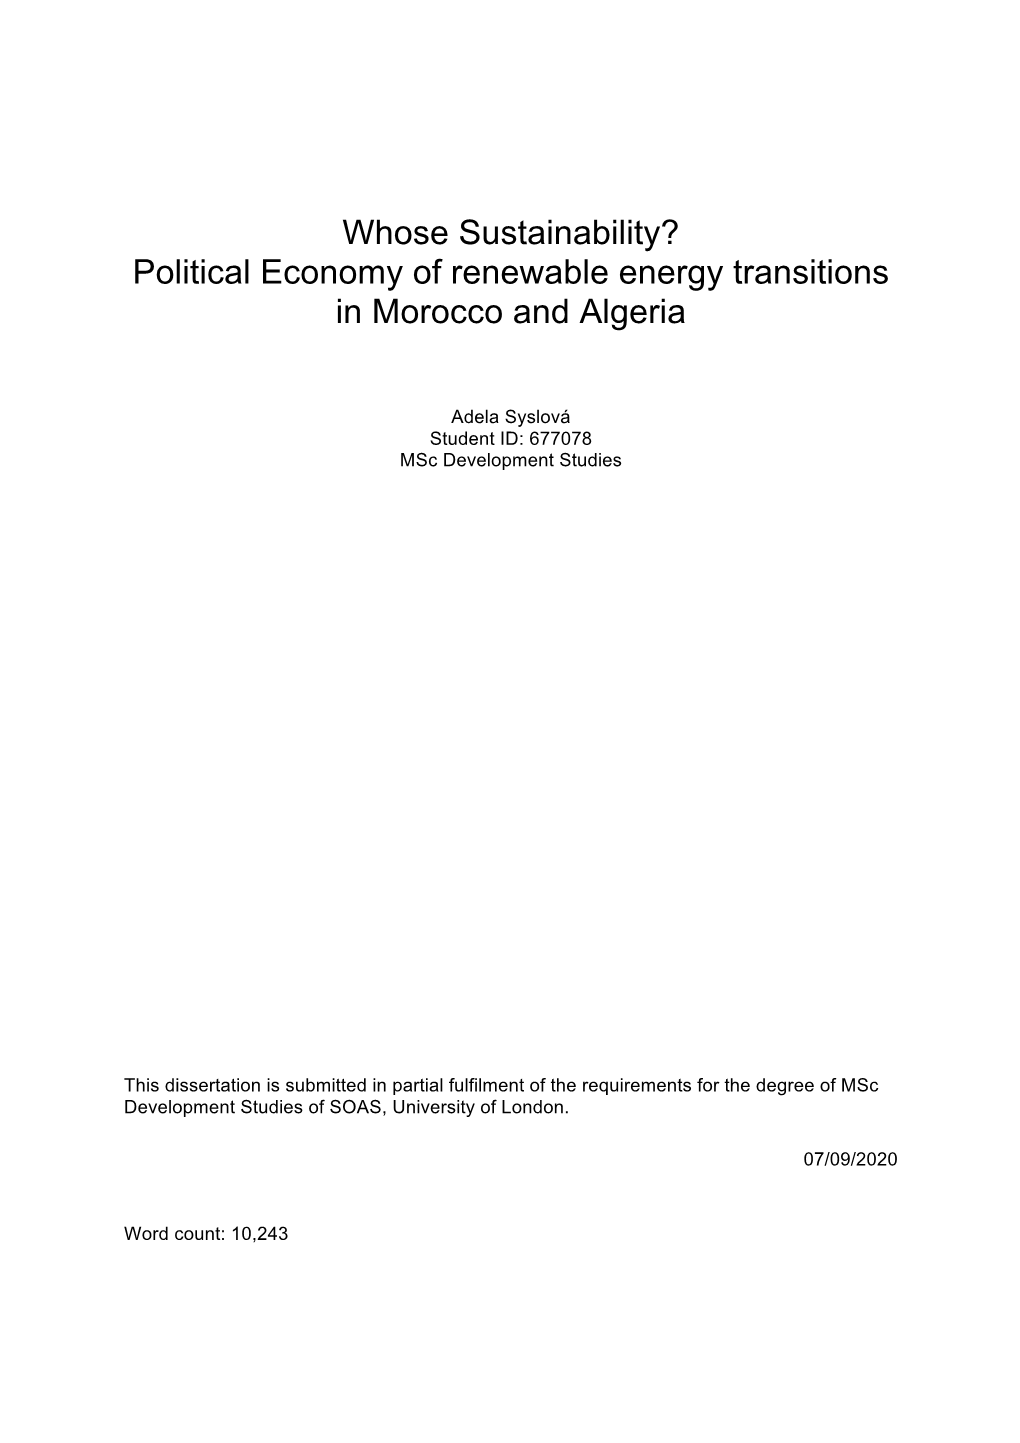 Whose Sustainability? Political Economy of Renewable Energy Transitions in Morocco and Algeria